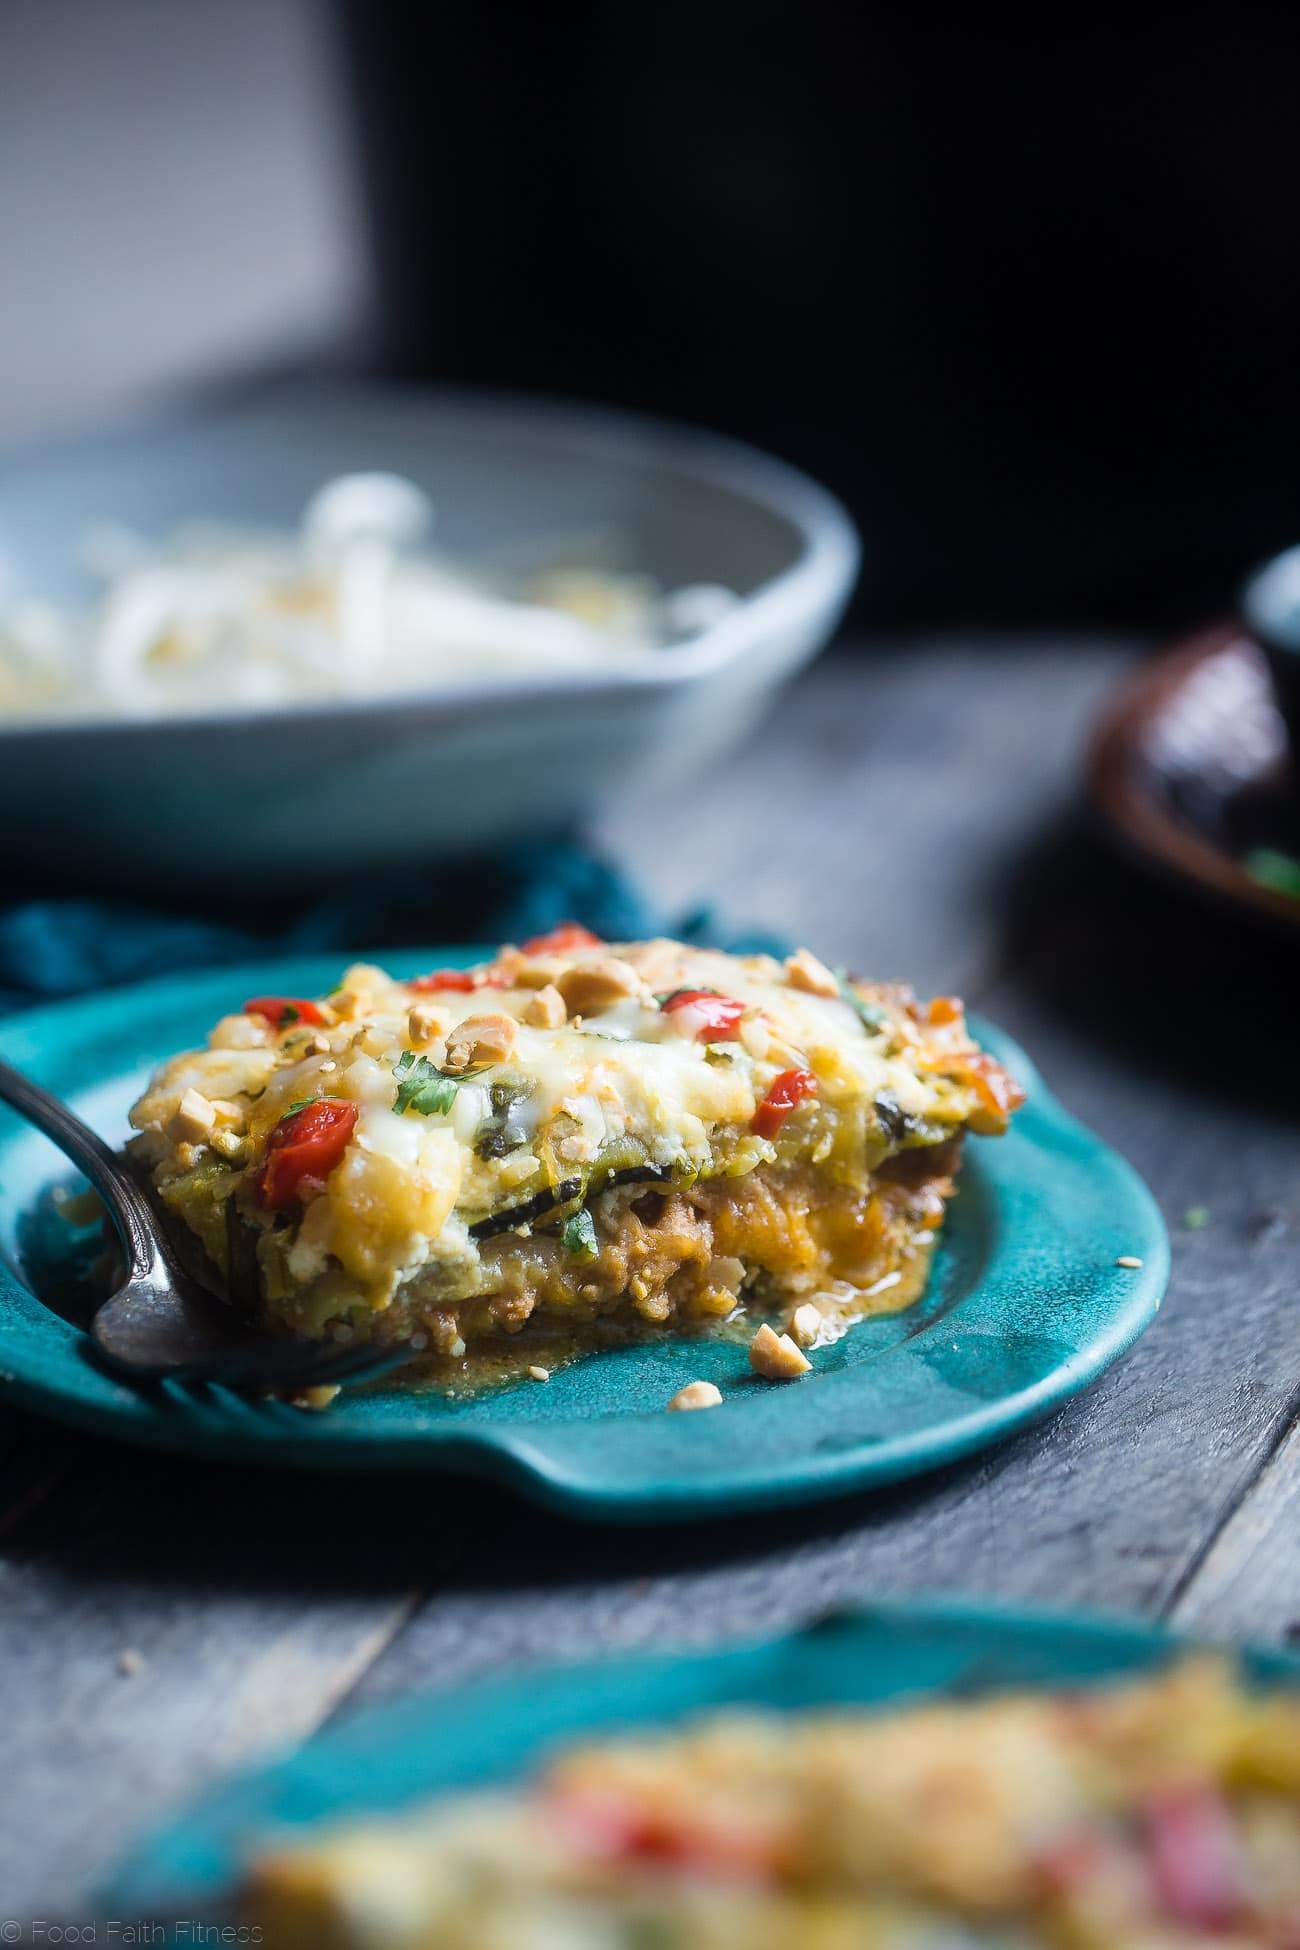 Thai Slow Cooker Zucchini Lasagna - This freezer-friendly zucchini lasagna is made in the slow cooker, and has a Thai peanut twist! It's a healthy, low carb and gluten free weeknight meal that the family will love! | Foodfaithfitness.com | @FoodFaithFit